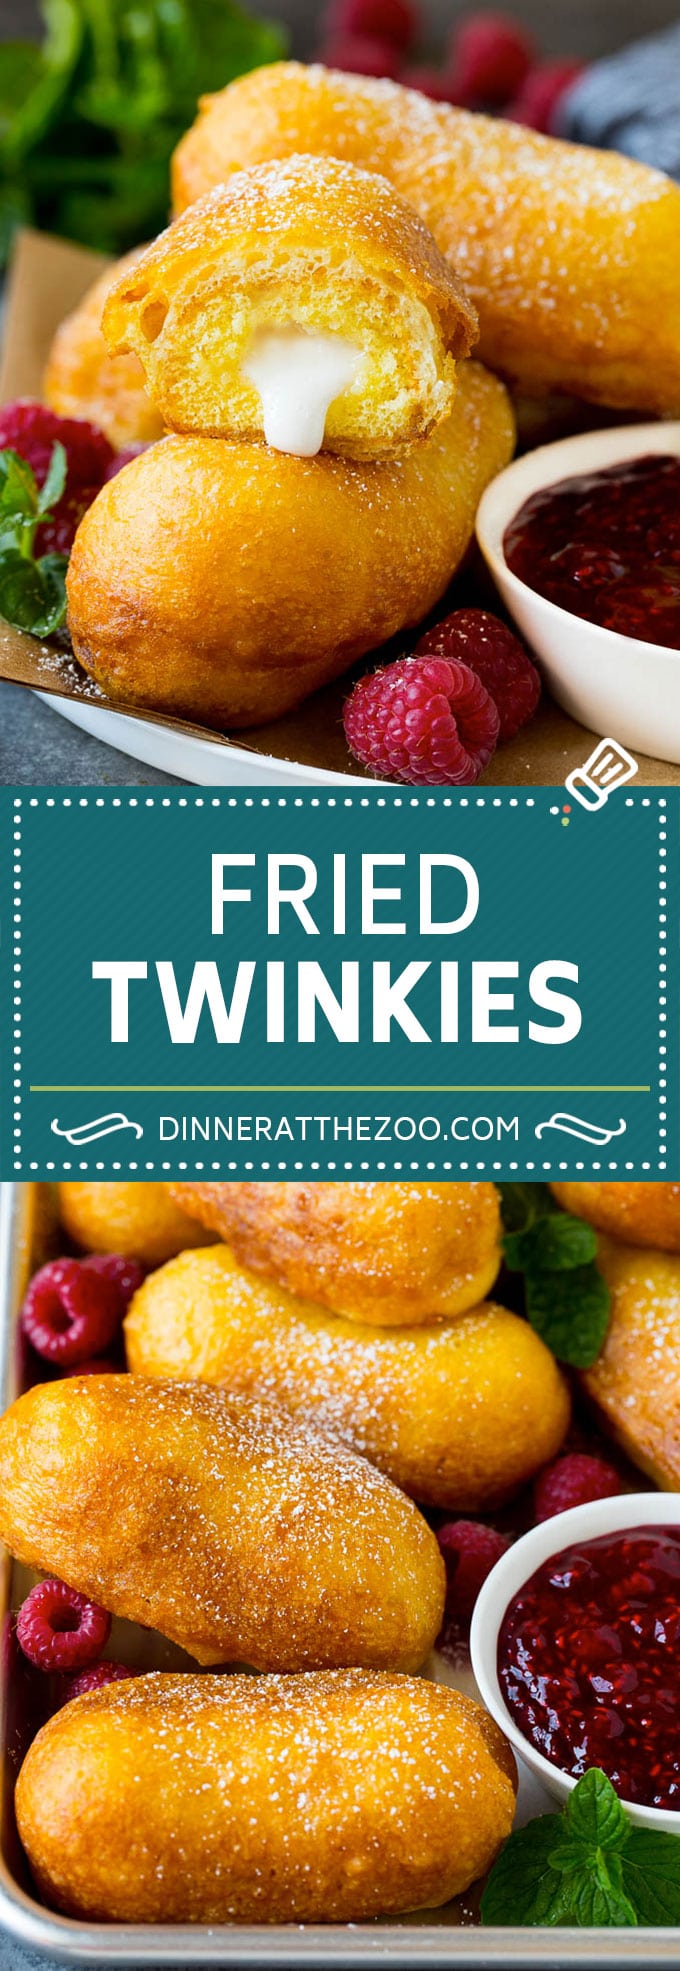 Fried Twinkies are a remake of the carnival classic that are fun and easy to make at home.